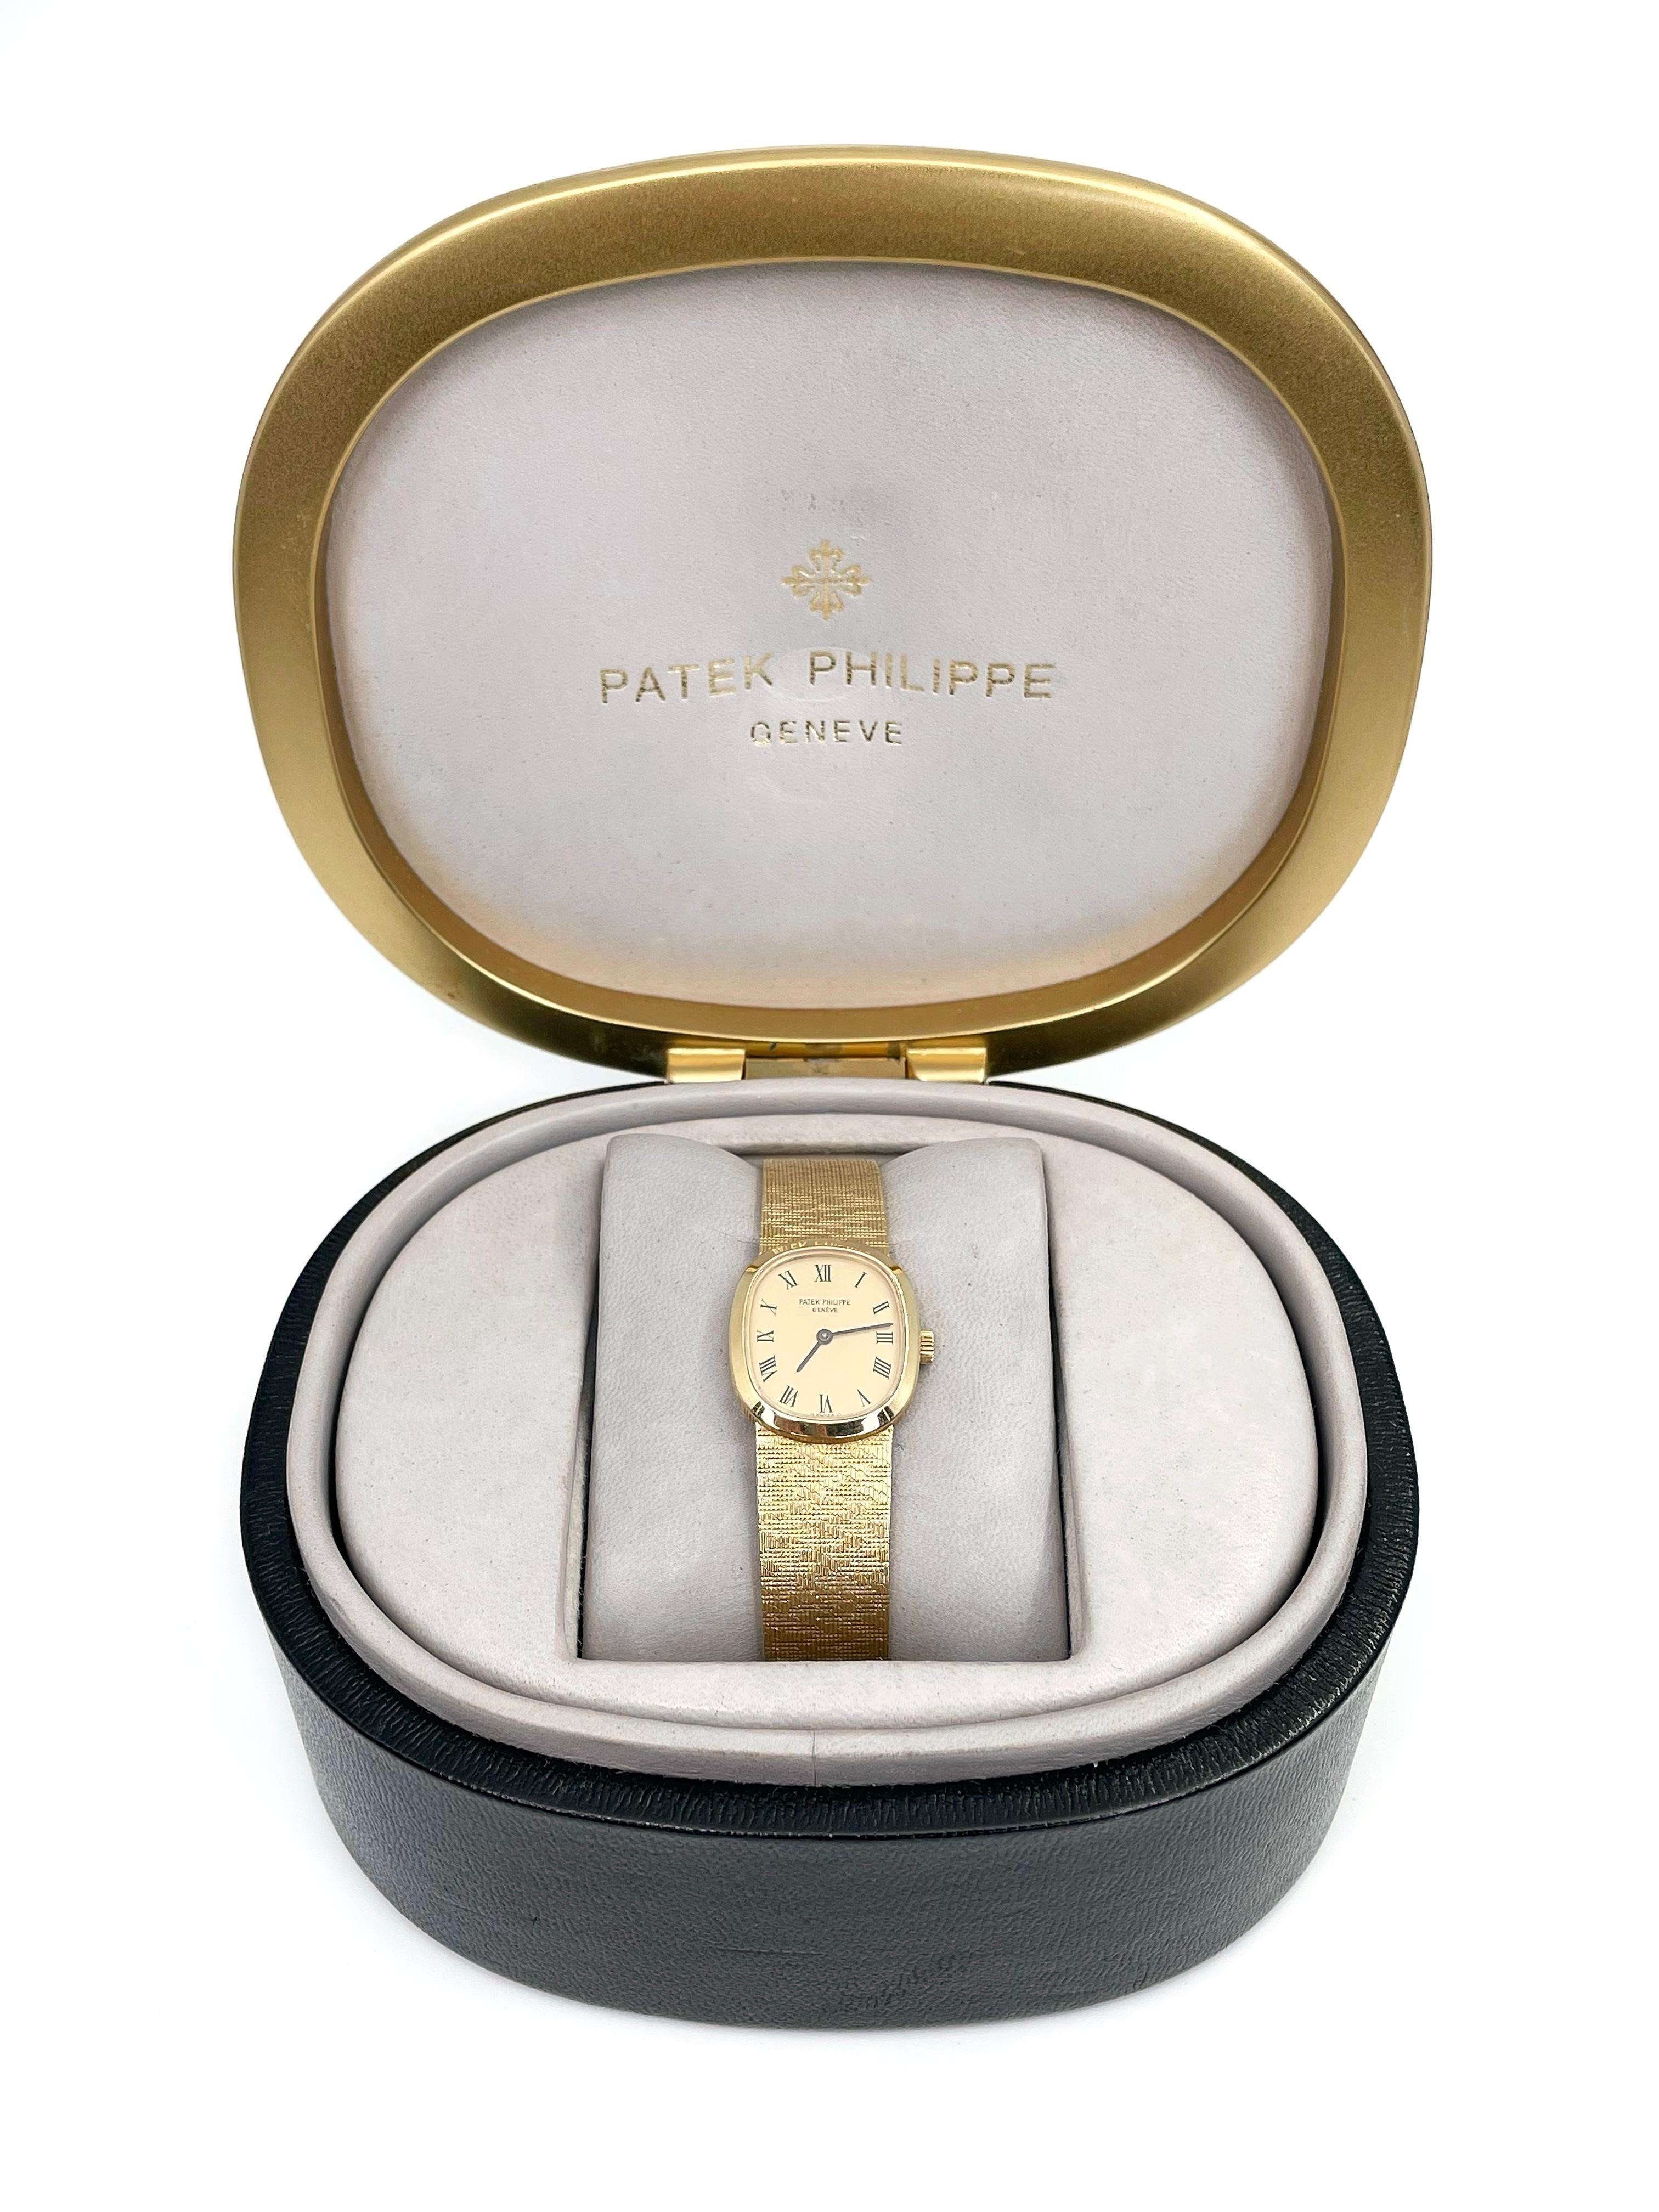 This is a luxurious vintage wrist watch designed by Patek Philippe in 1970s. The piece is crafted in 18K yellow gold. It is an elegant and iconic accessory. 

Reference no.: 4132/1
Year: 1970s
Movement: mechanical manually wound, no. 1272197
Calibre